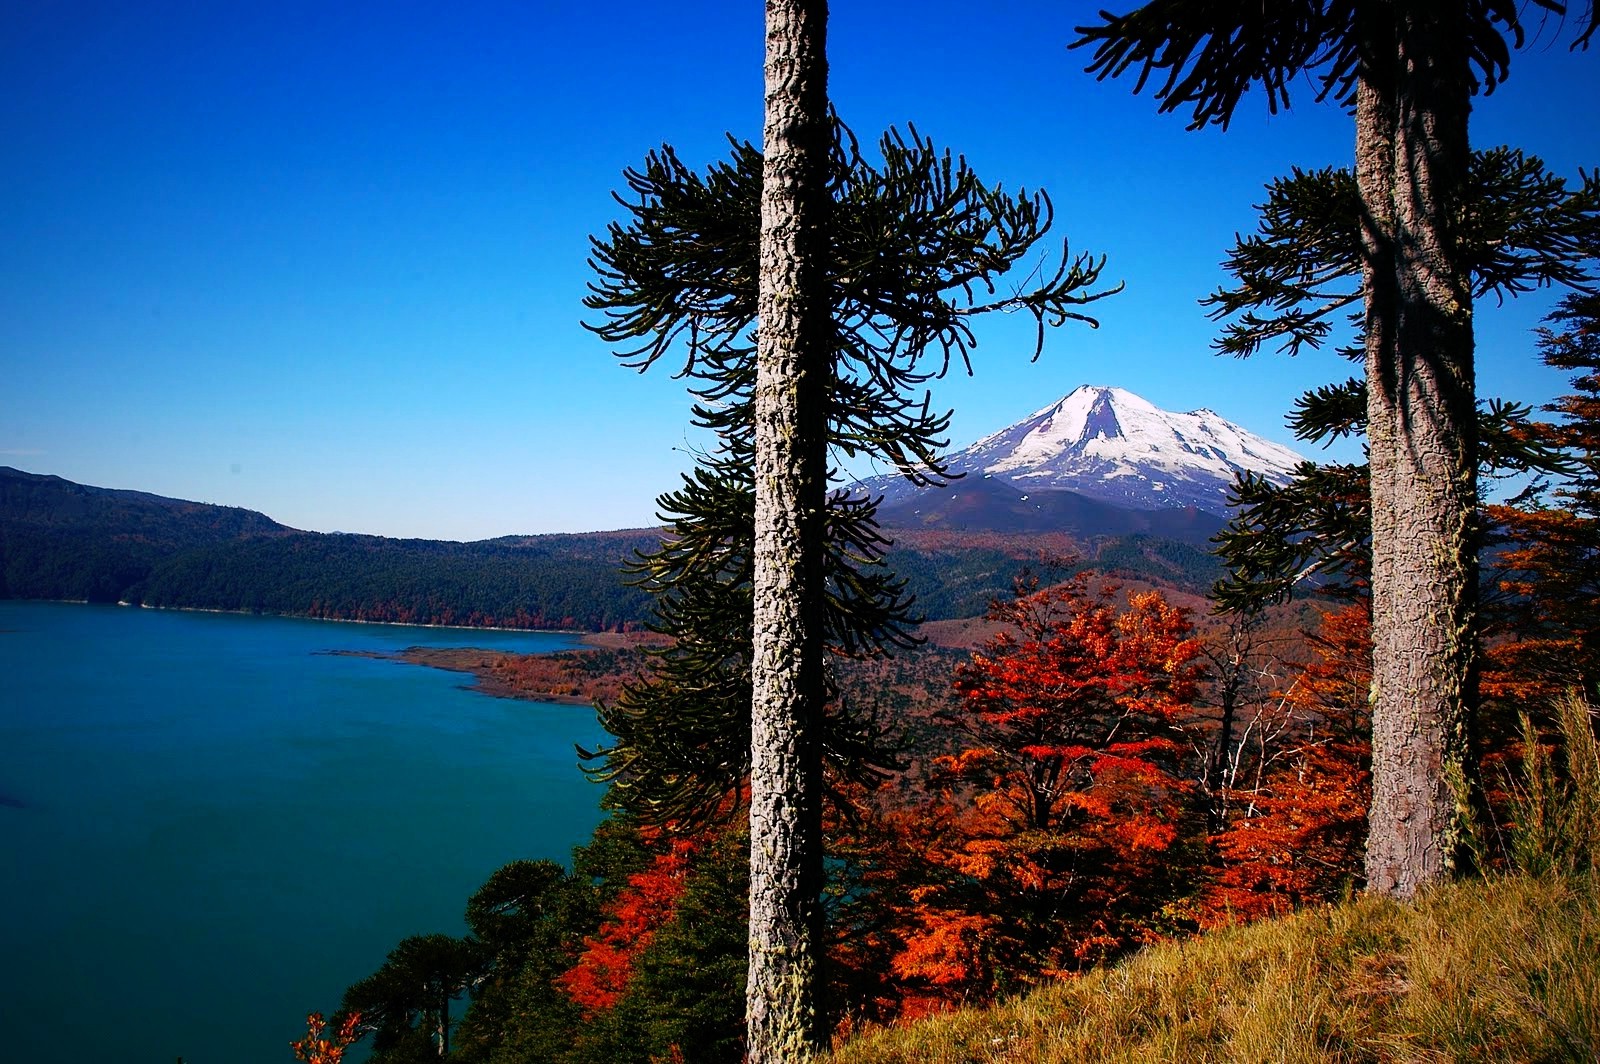 volcano, Chile, Forest, Lake, Fall, Snowy Peak, Trees, Monkey Puzzle Tree, Grass, Morning, Nature, Mountain, Landscape Wallpaper